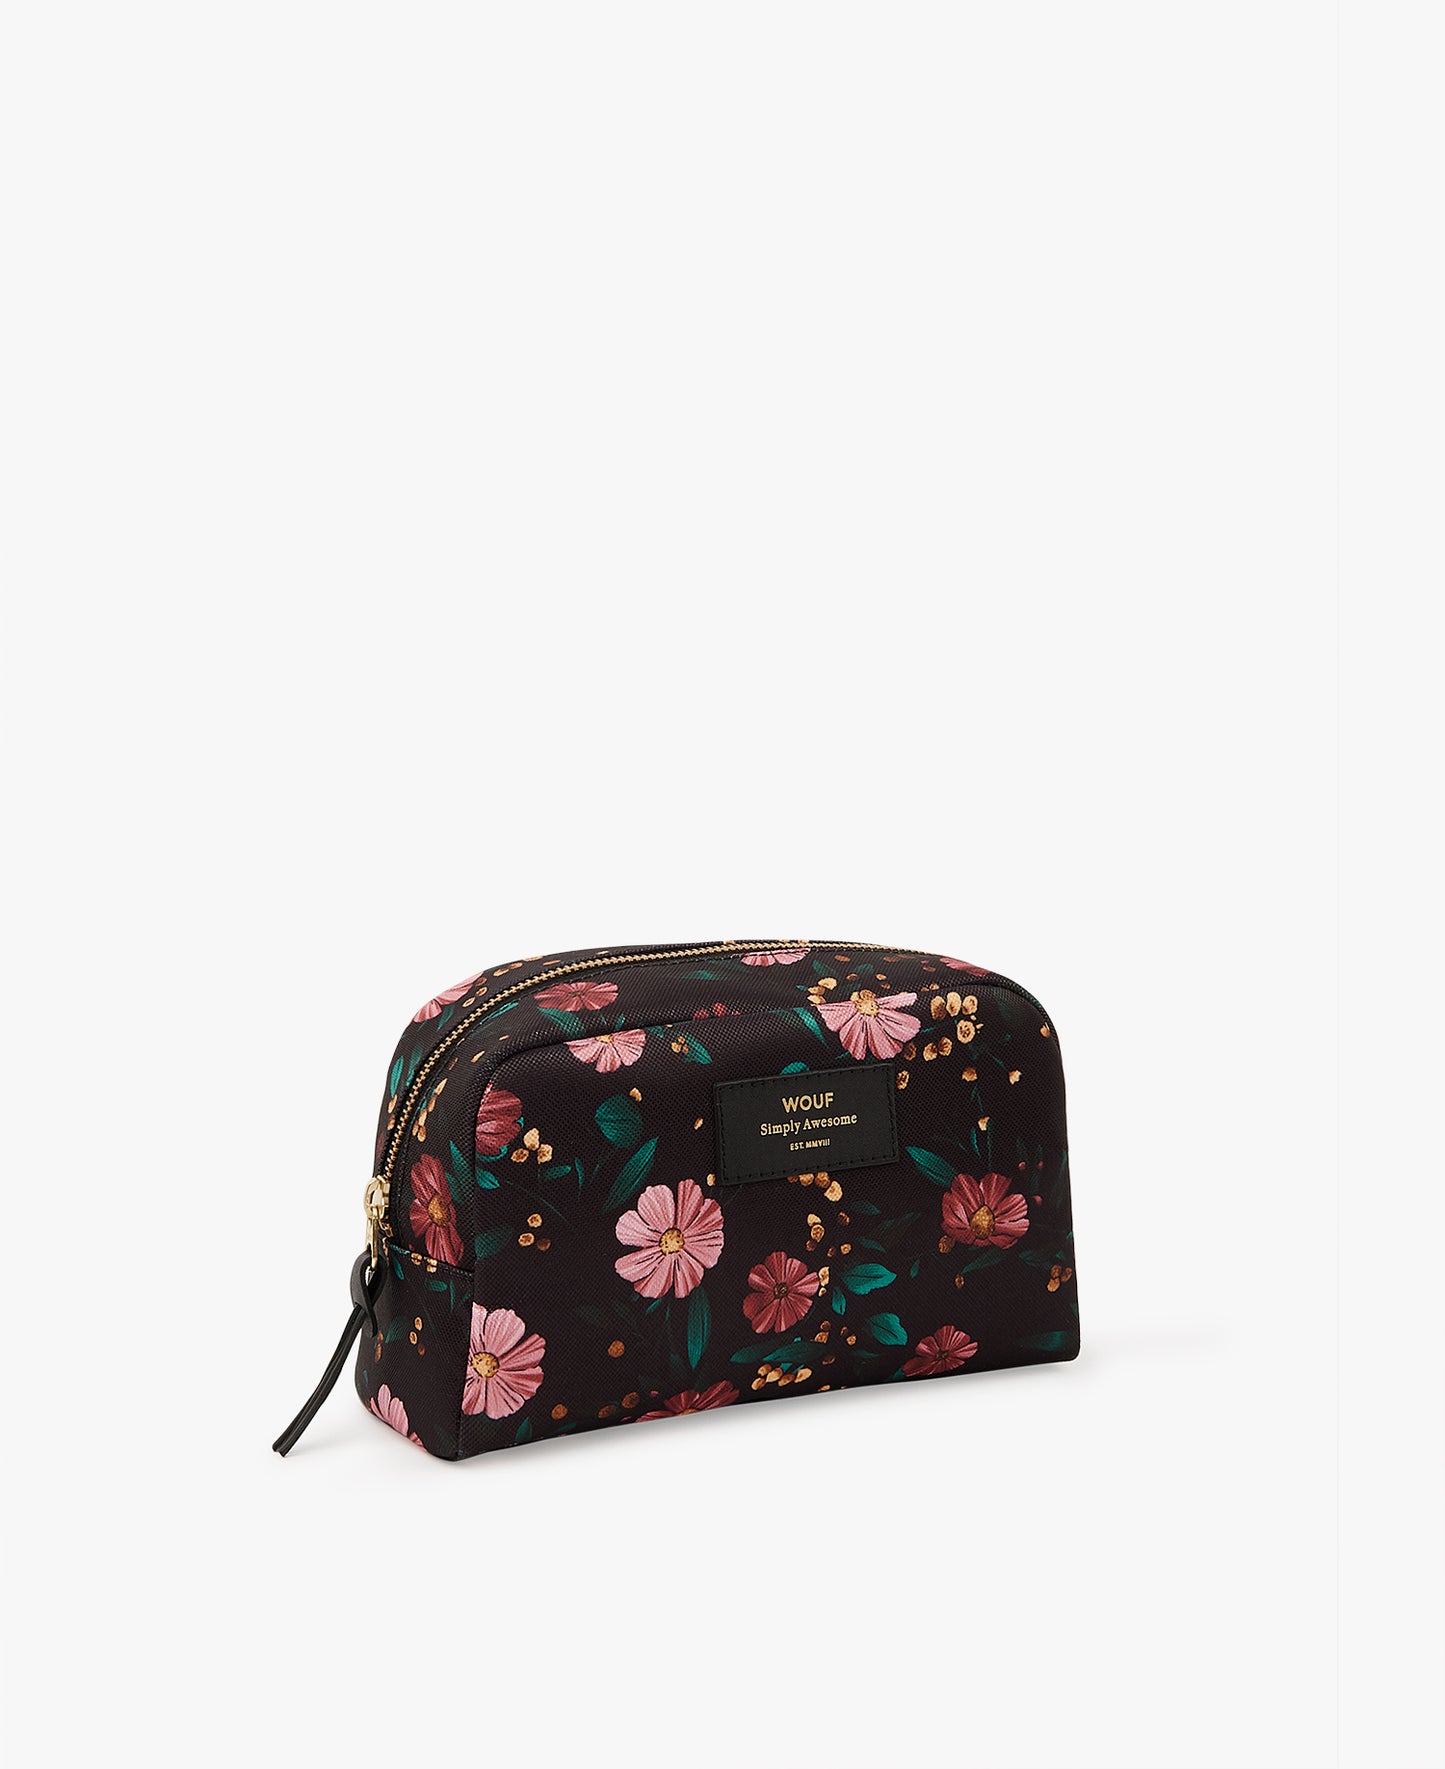 Large Make-Up Pouch - Black Flowers